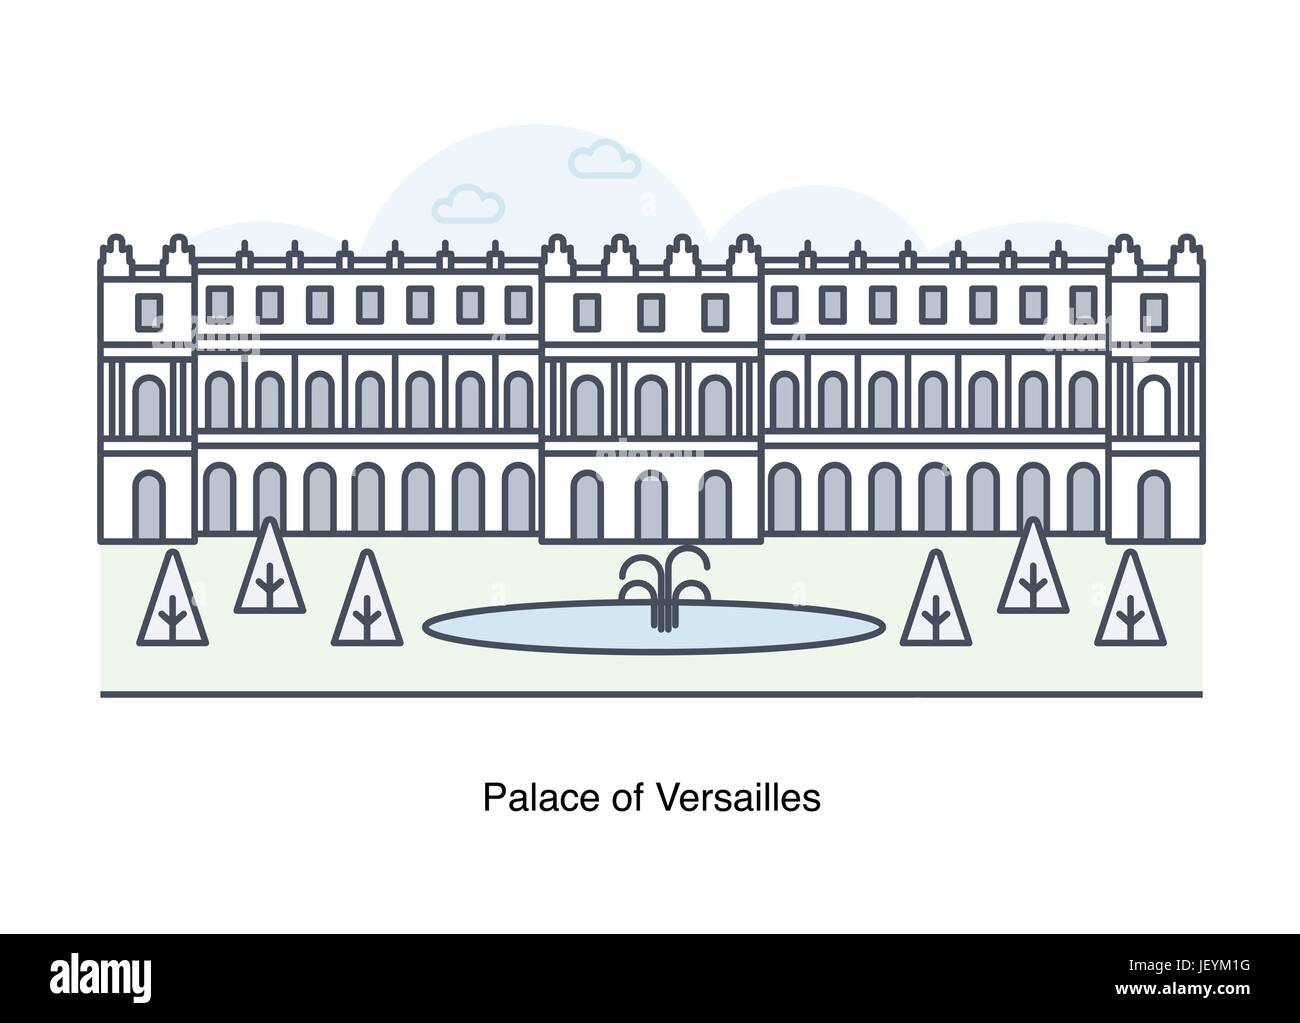 Vector line illustration of Palace of Versailles, Paris, France. Stock Vector